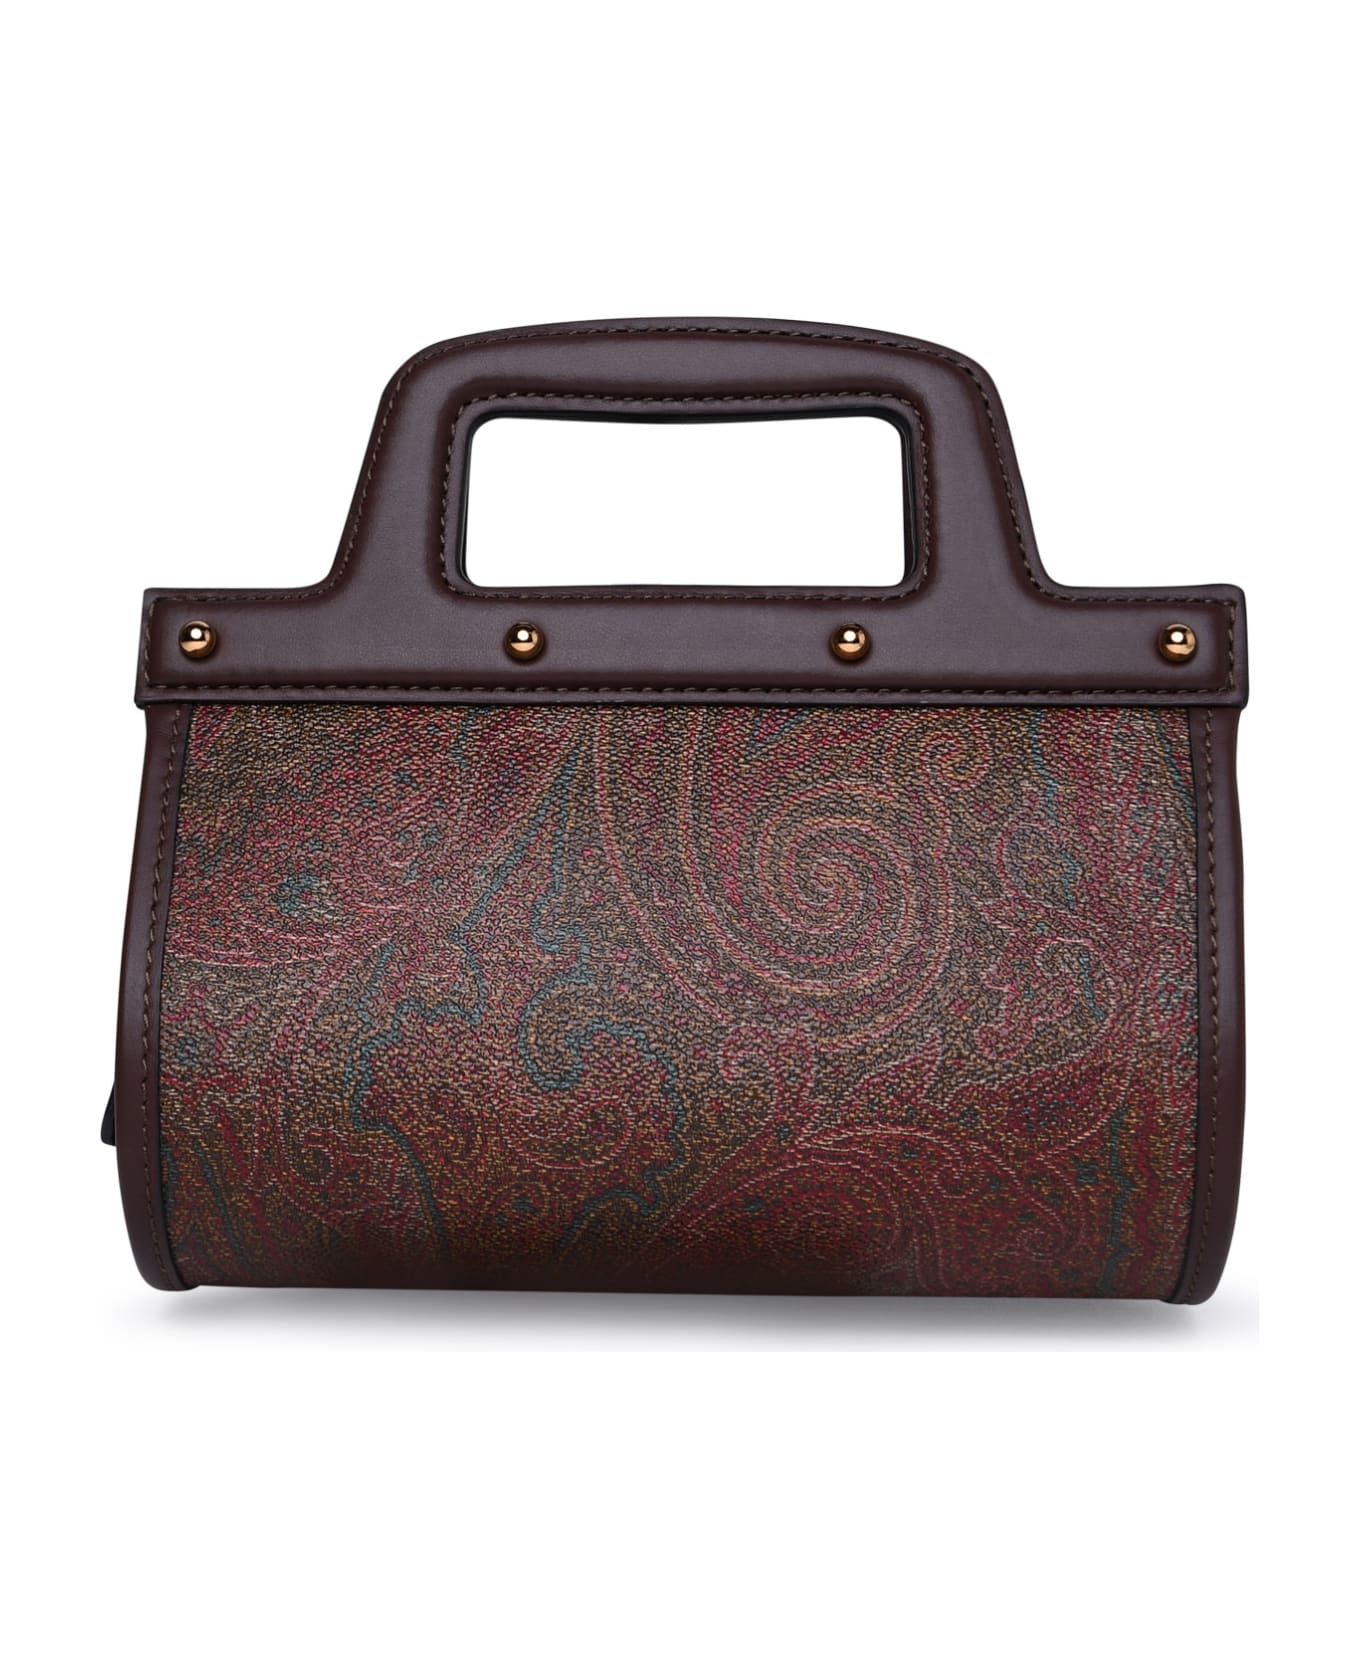 Etro Brown Leather Blend Bag - Marrone トートバッグ